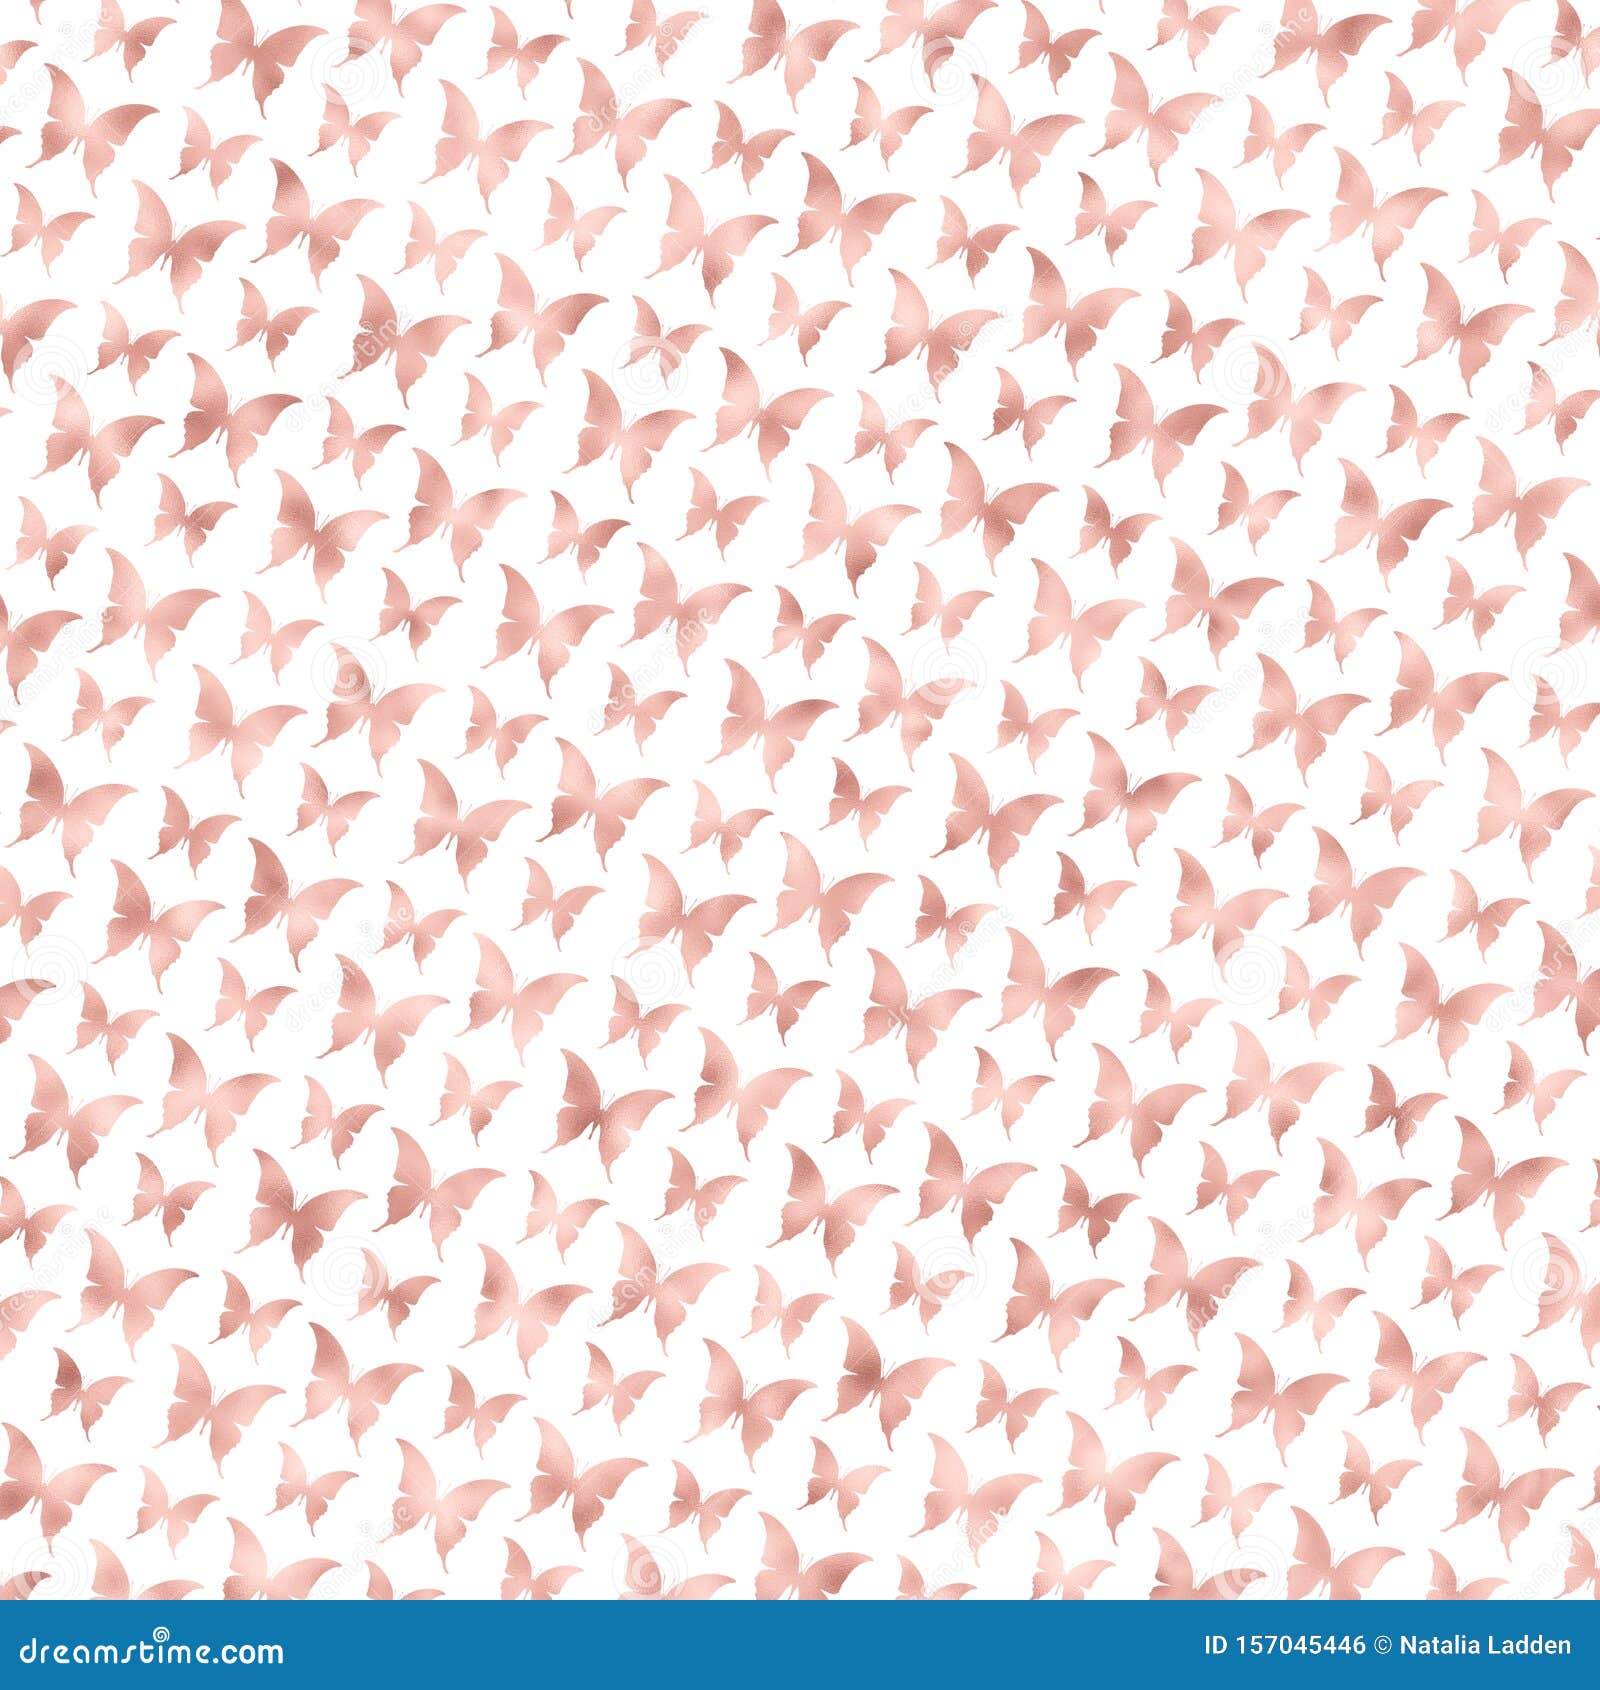 Download Rose Gold Pattern Repeating Butterflies Wallpaper ...